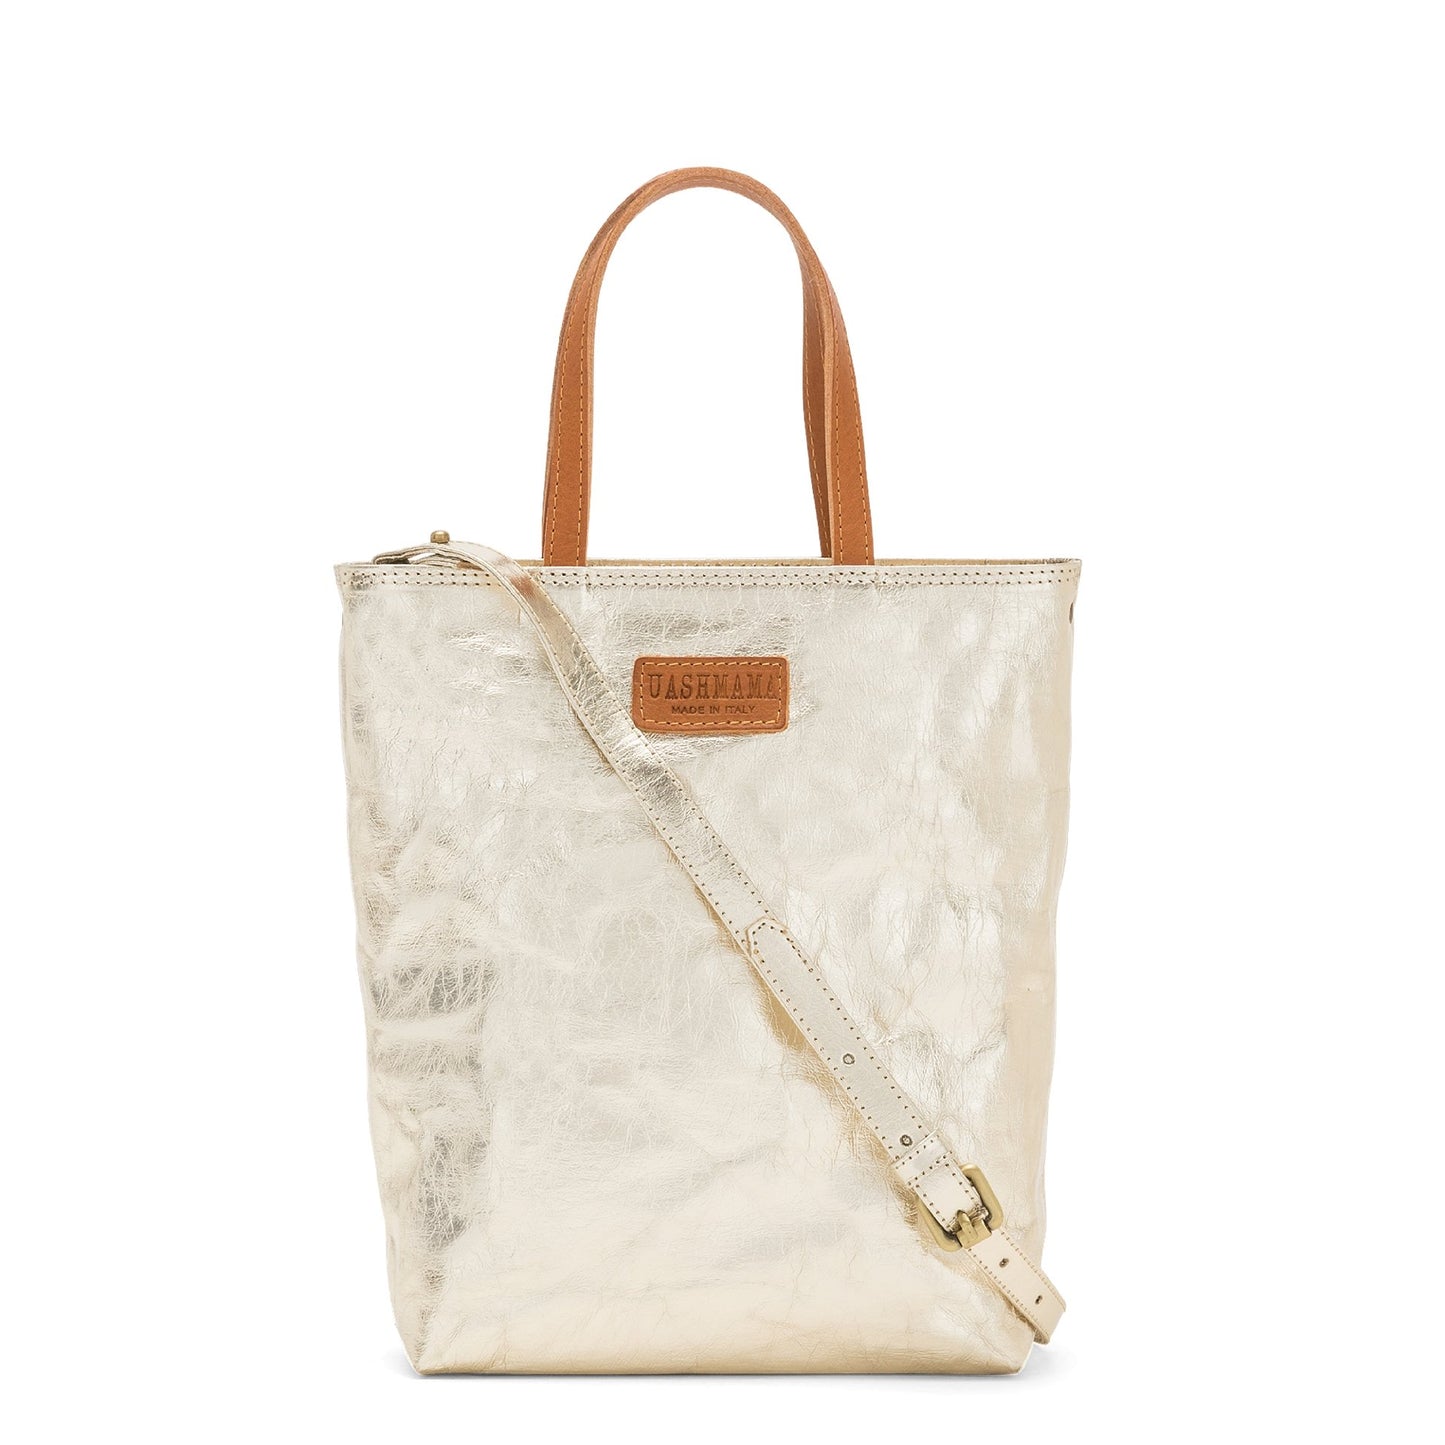 A washable paper rectangular tote with long top handles and a long shoulder strap is shown from the front angle. It is metallic gold in colour.